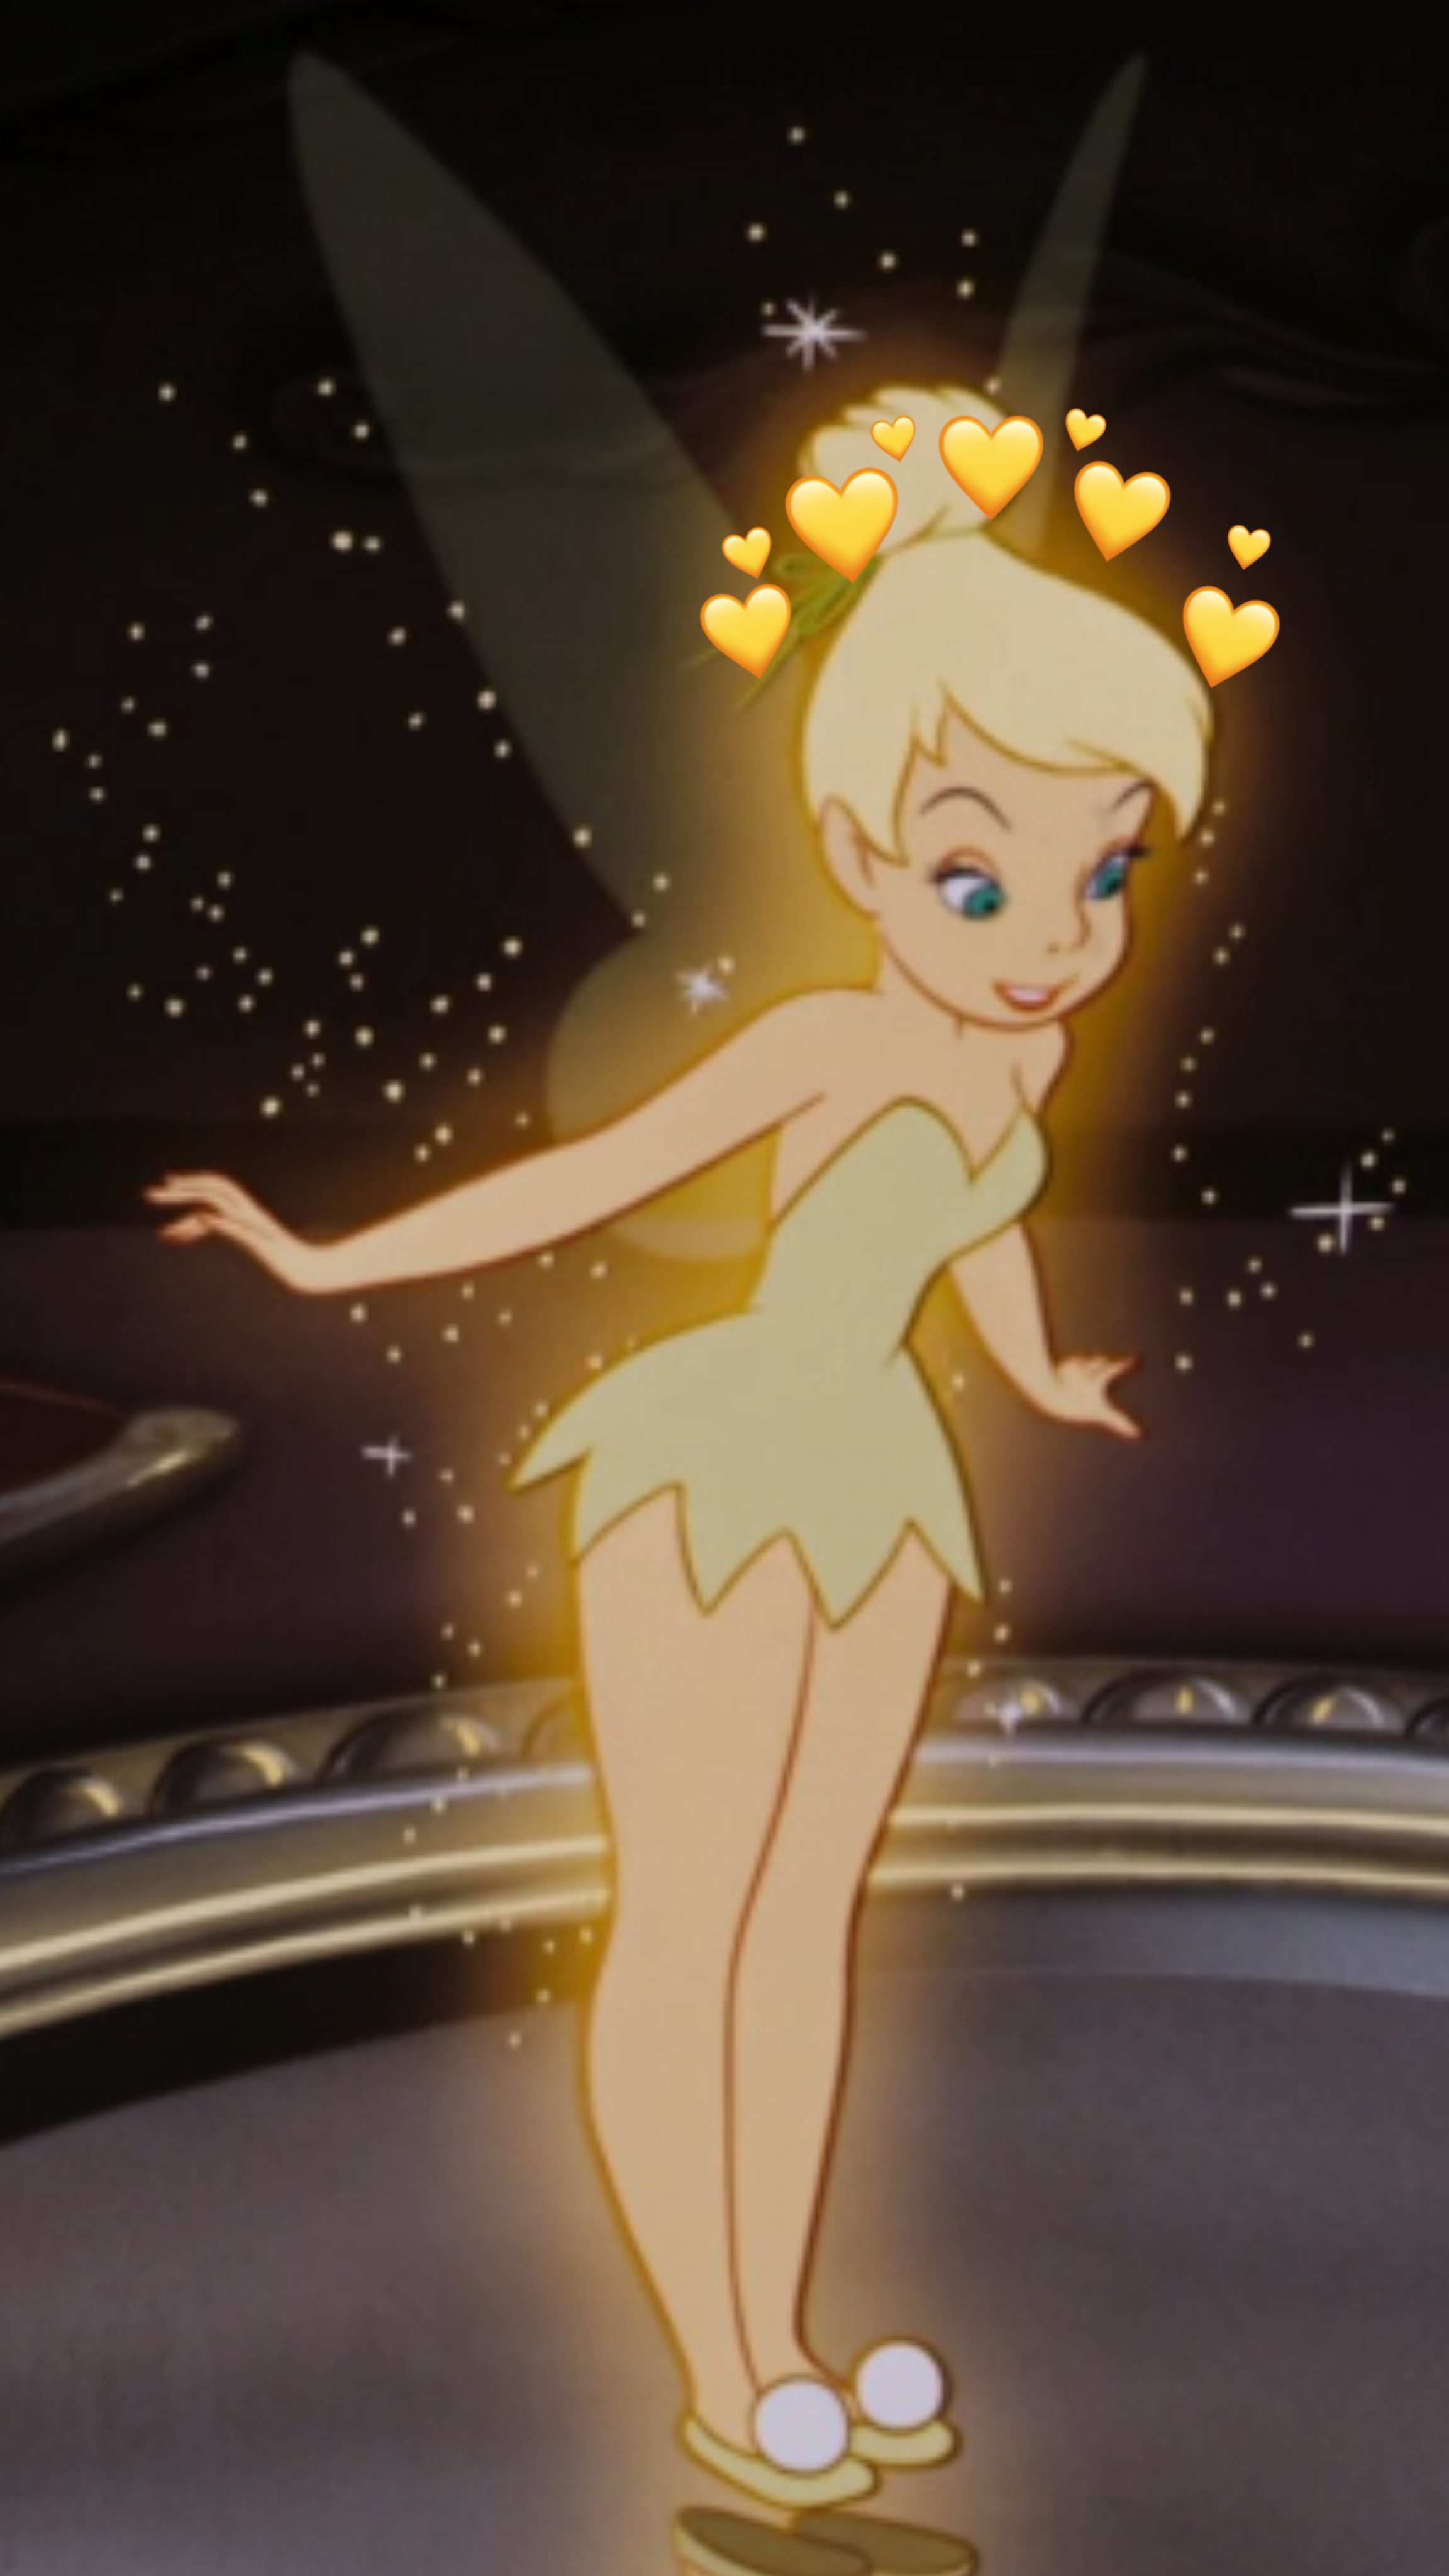 freetoedit tinkerbell disney image by @michellelimelight2.